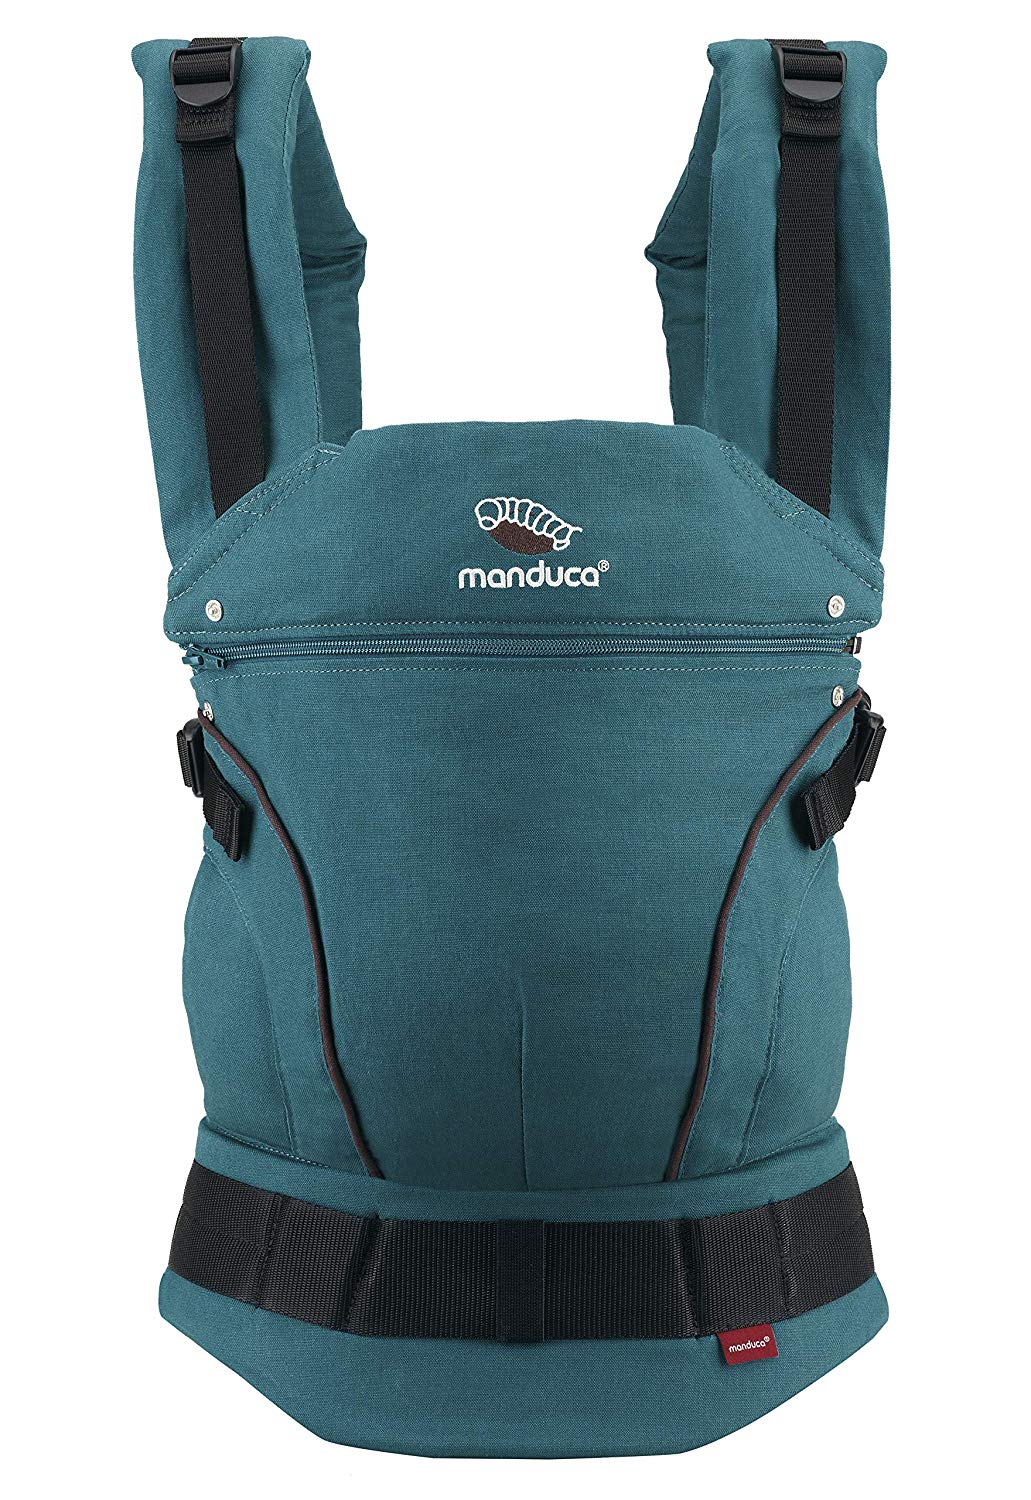 Manduca First Baby and Children’s Carrier, Hemp Cotton, Baby Carrier Made from Soft Canvas (Hemp and Organic Cotton) with Back Extension and Ergonomic Waist Belt